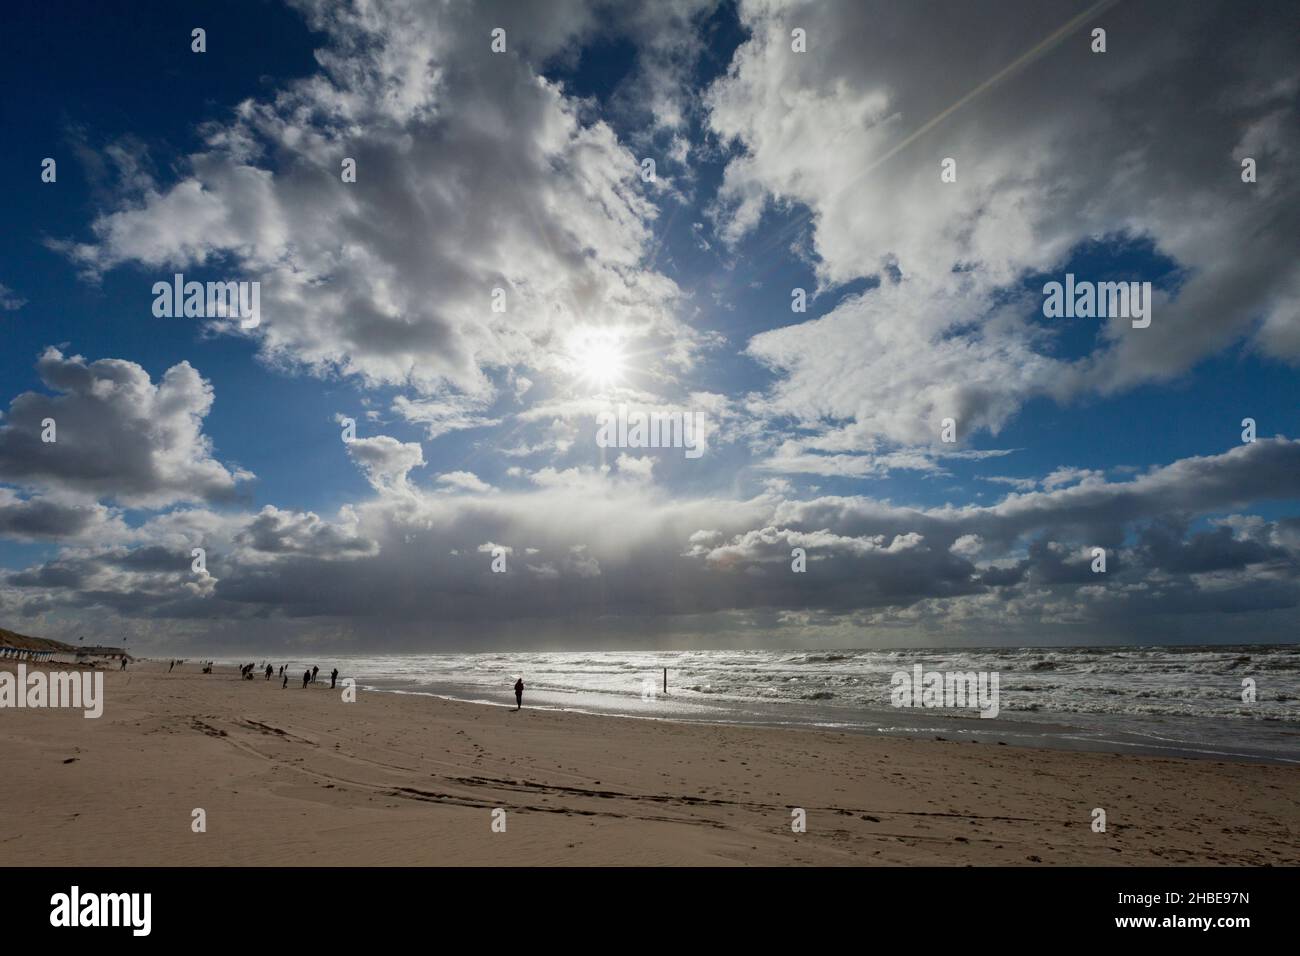 People walking on beach, on the West coast of the Island Texel, beside the town of De Koog, Holland, Europe Stock Photo